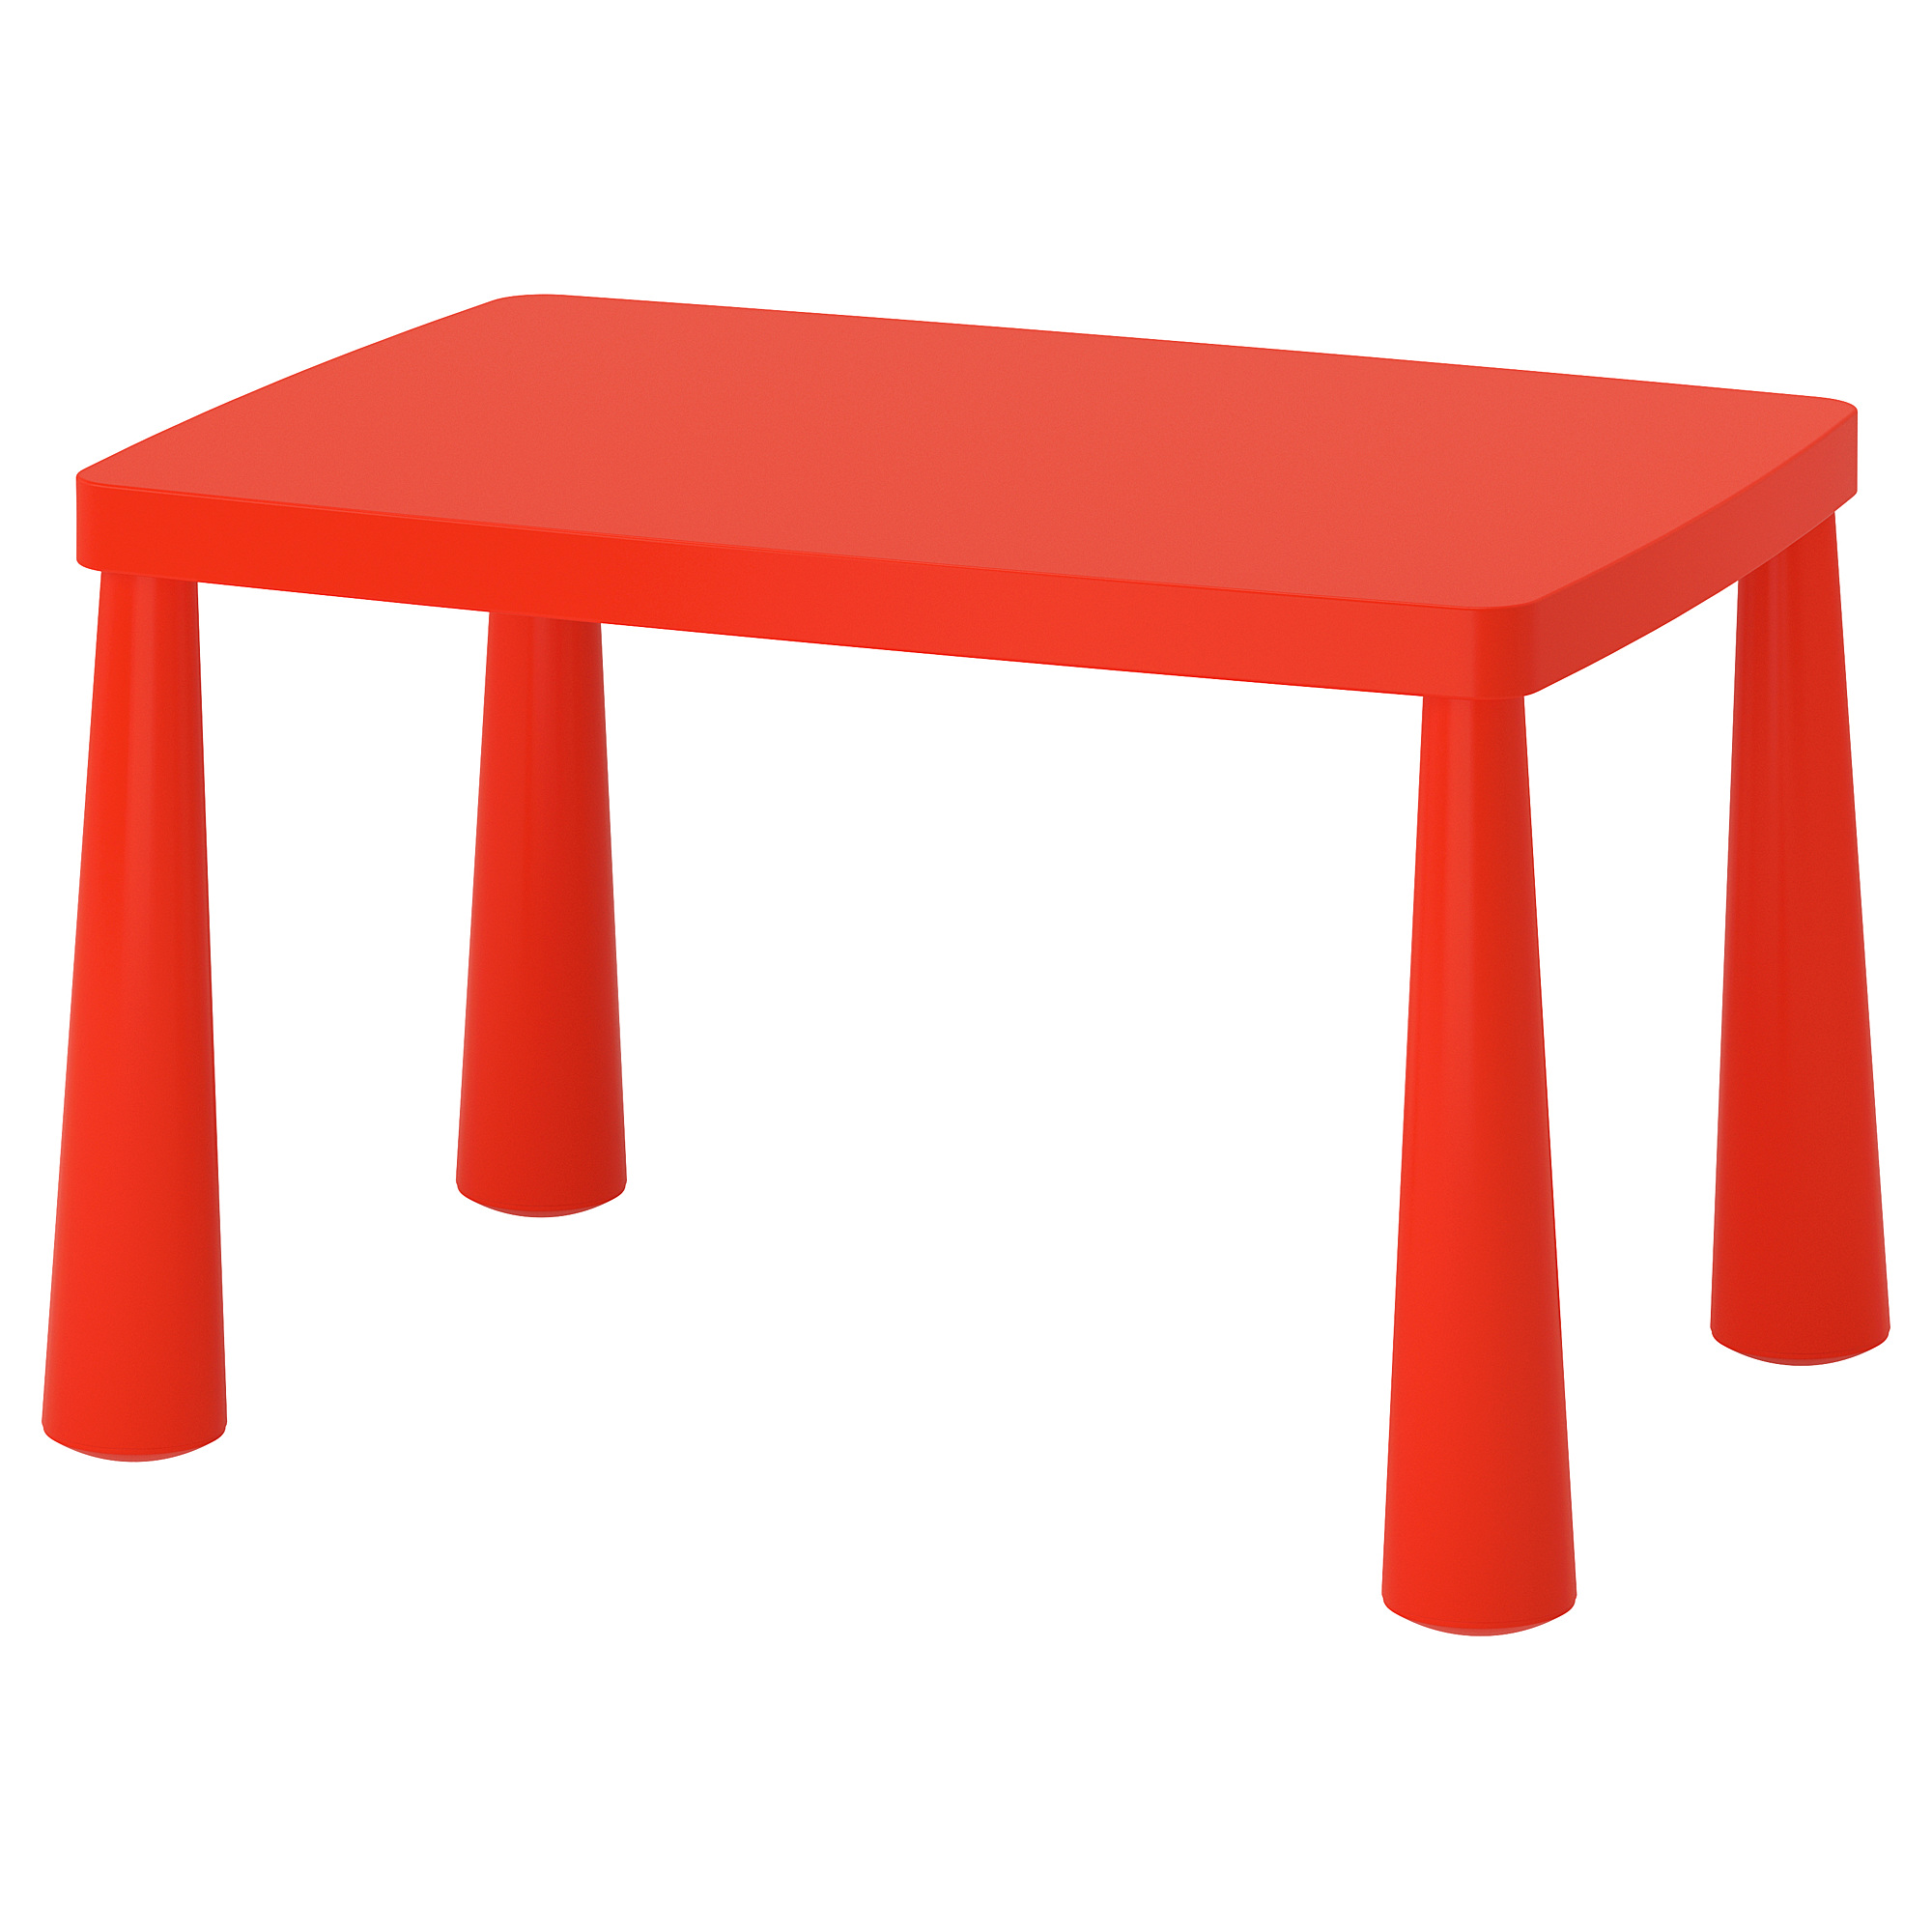 mammut ikea table and chairs